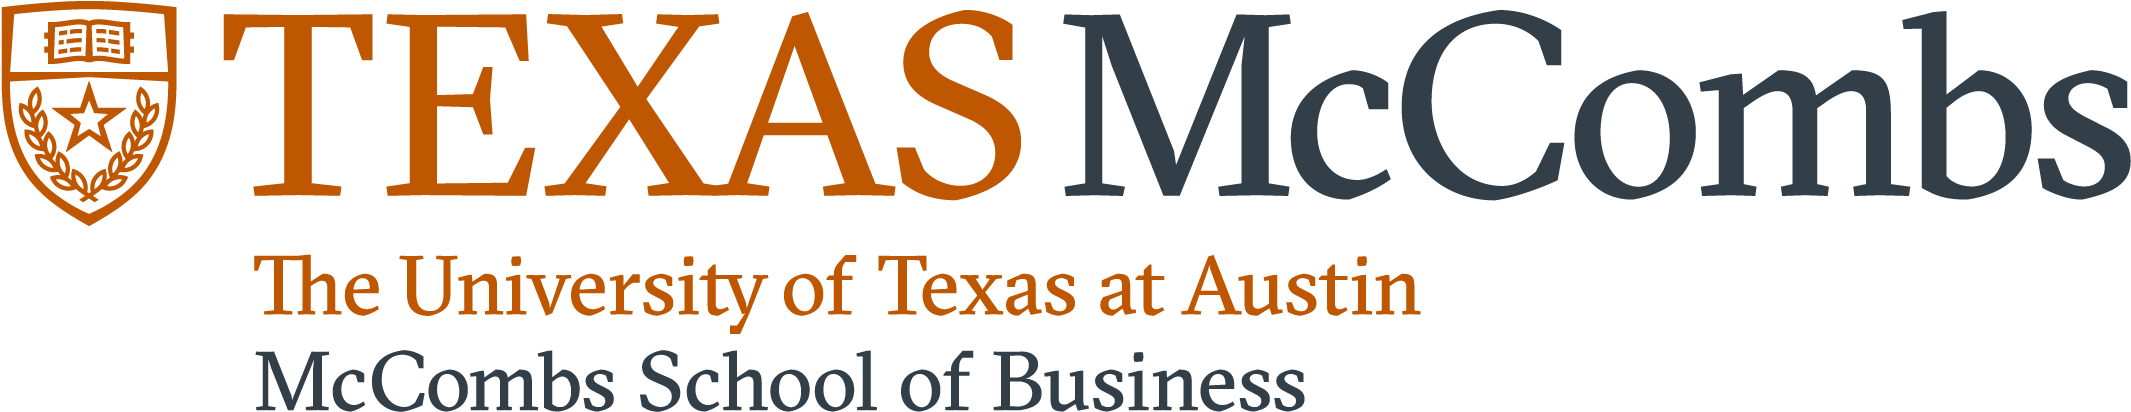 University Of Texas At Austin Mccombs School Of Business University Info 3 Online Courses In English Distancelearningportal Com